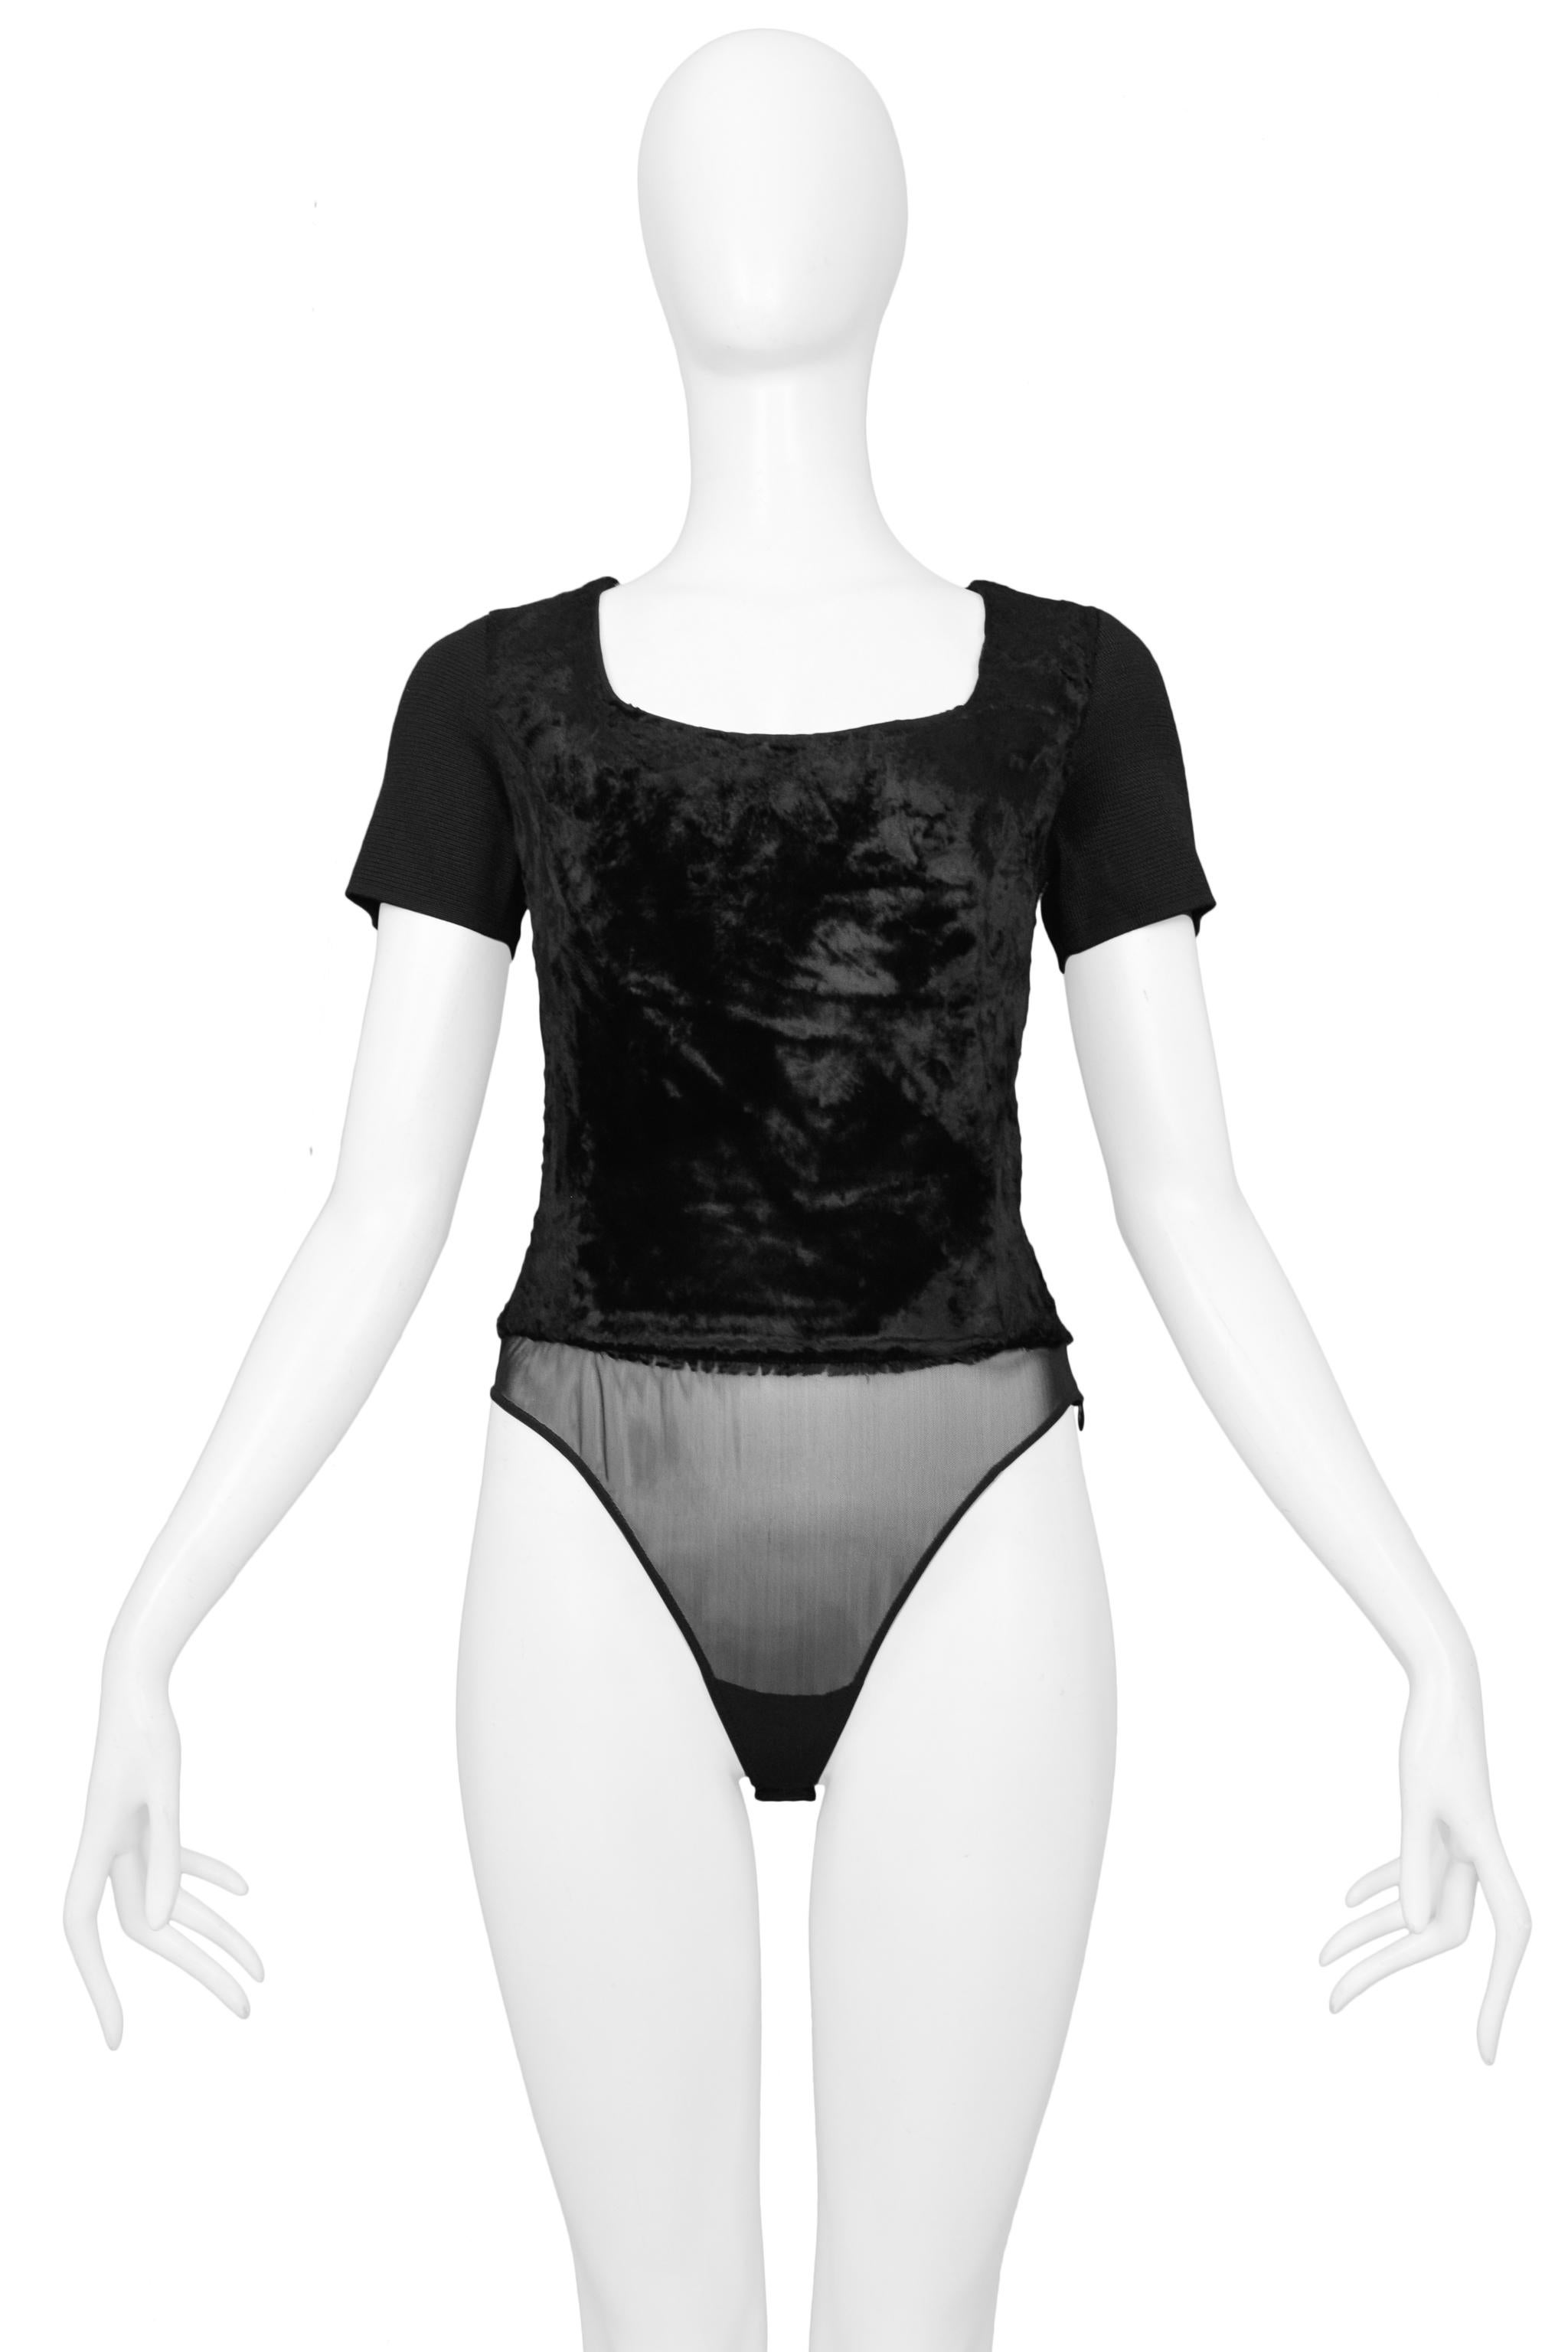 Resurrection is excited to offer a vintage Gianfranco Ferre black velvet bodysuit featuring a scoop neck, short sleeves, snap crotch, sheer bottom, and side zipper. 

Gianfranco Ferre
Size 38
Viscose, Polymide, Elastic
Excellent Vintage Condition